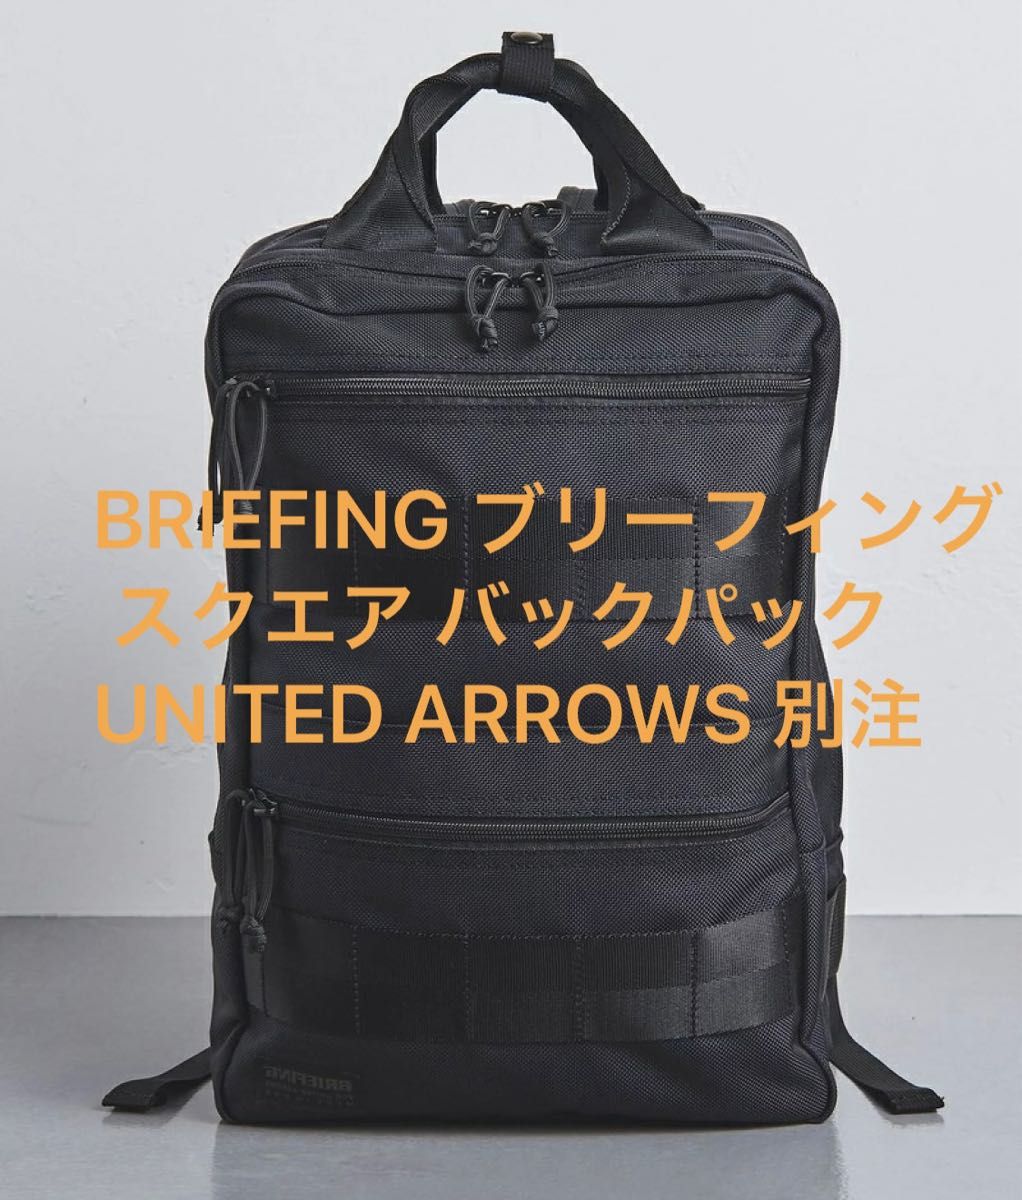 BRIEFING ブリーフィング スクエア バックパック　UNITED ARROWS 別注